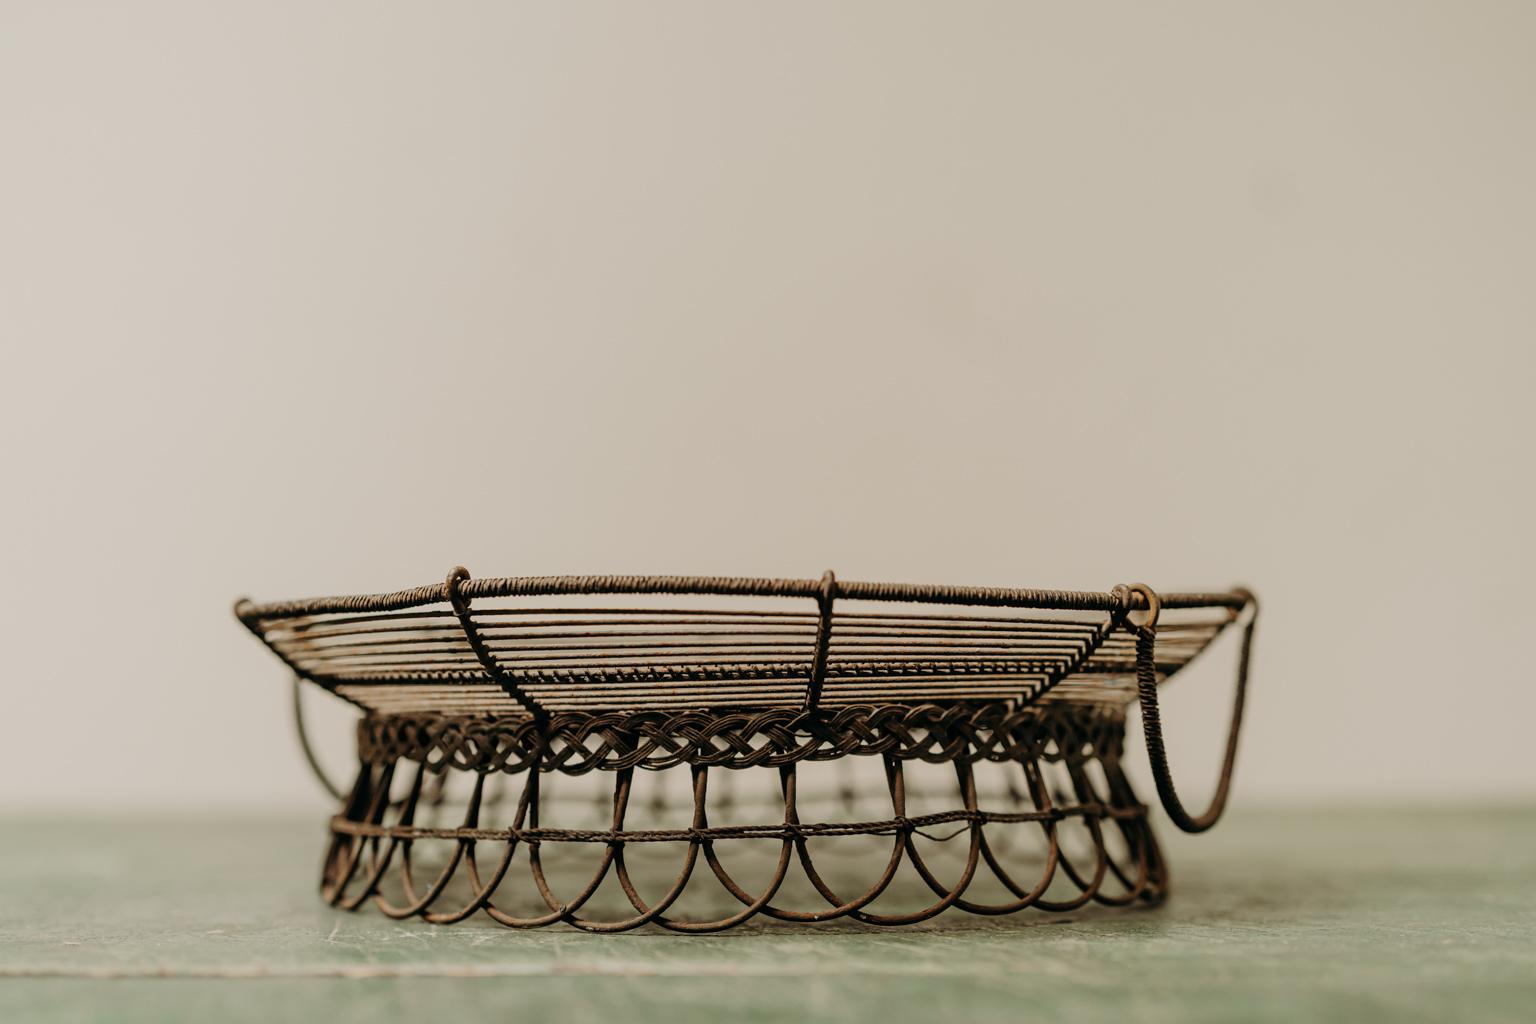 Travail de maitrise/compagnonnage, this little gem,
was made in France during the 19th century, woven iron fruits basket, truly a rare find, these items were made as proof of craftsmanship.